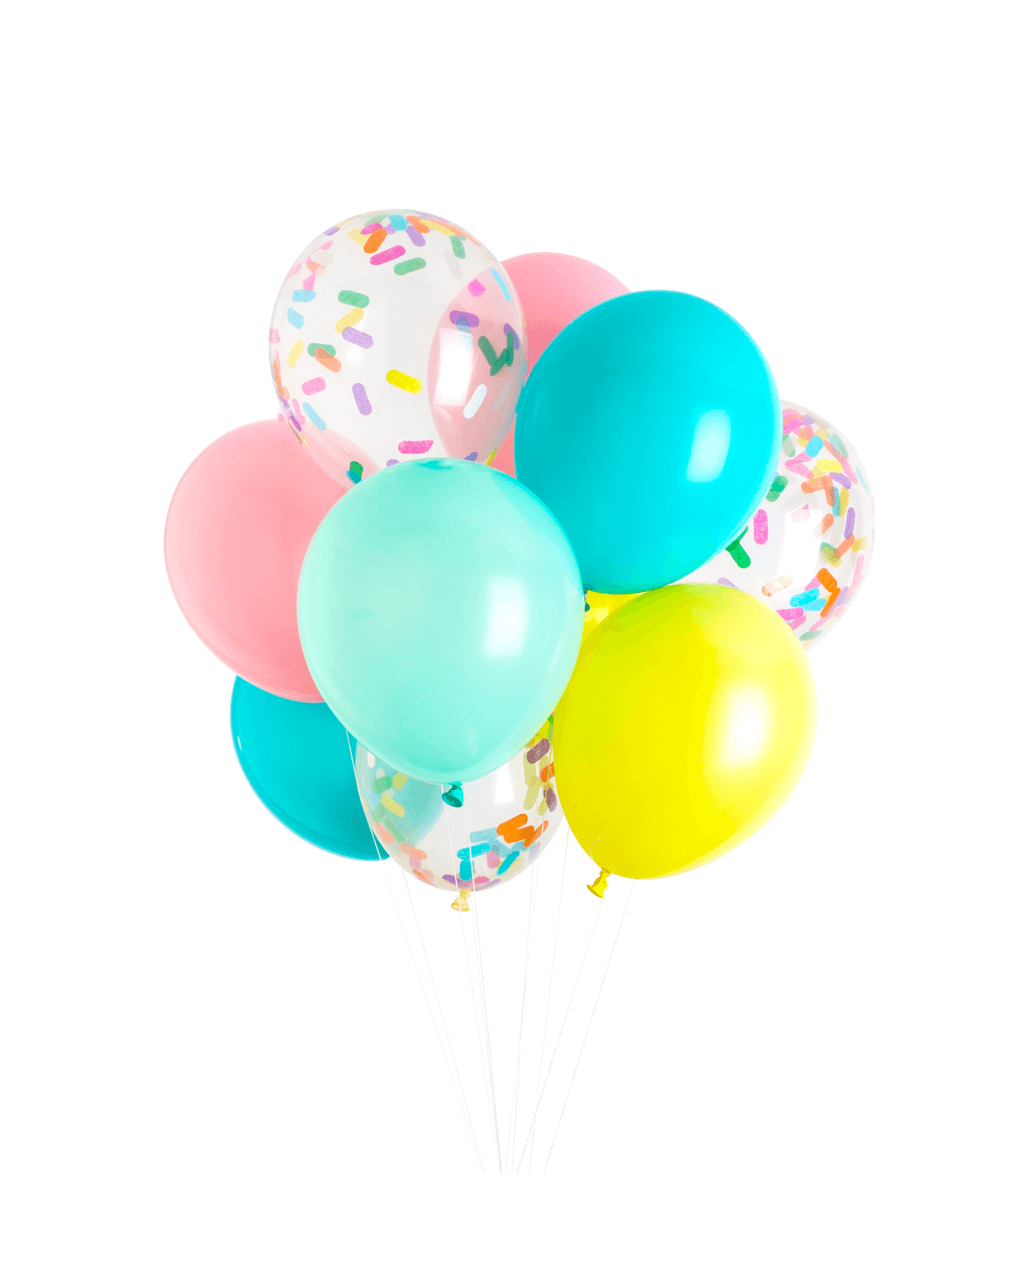 An assortment of colored balloons and clear confetti filled balloons by Studio Pep at Just Peachy.